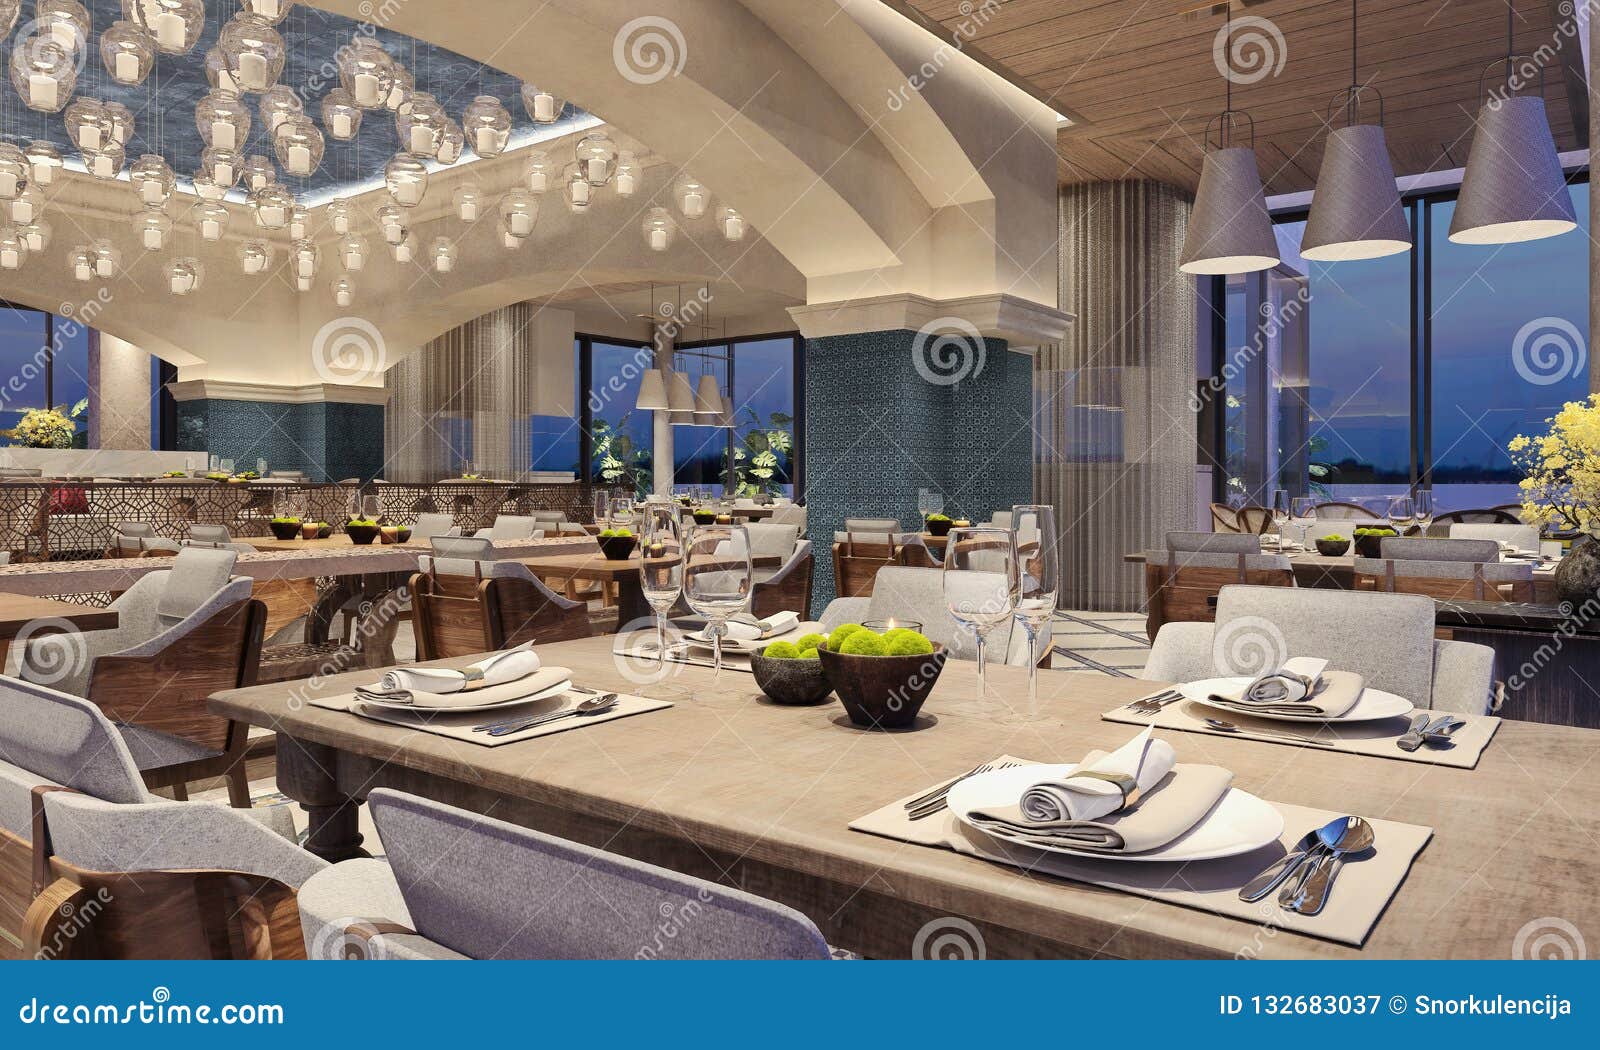 Modern Interior Design Of A Restaurant Arabic Style With